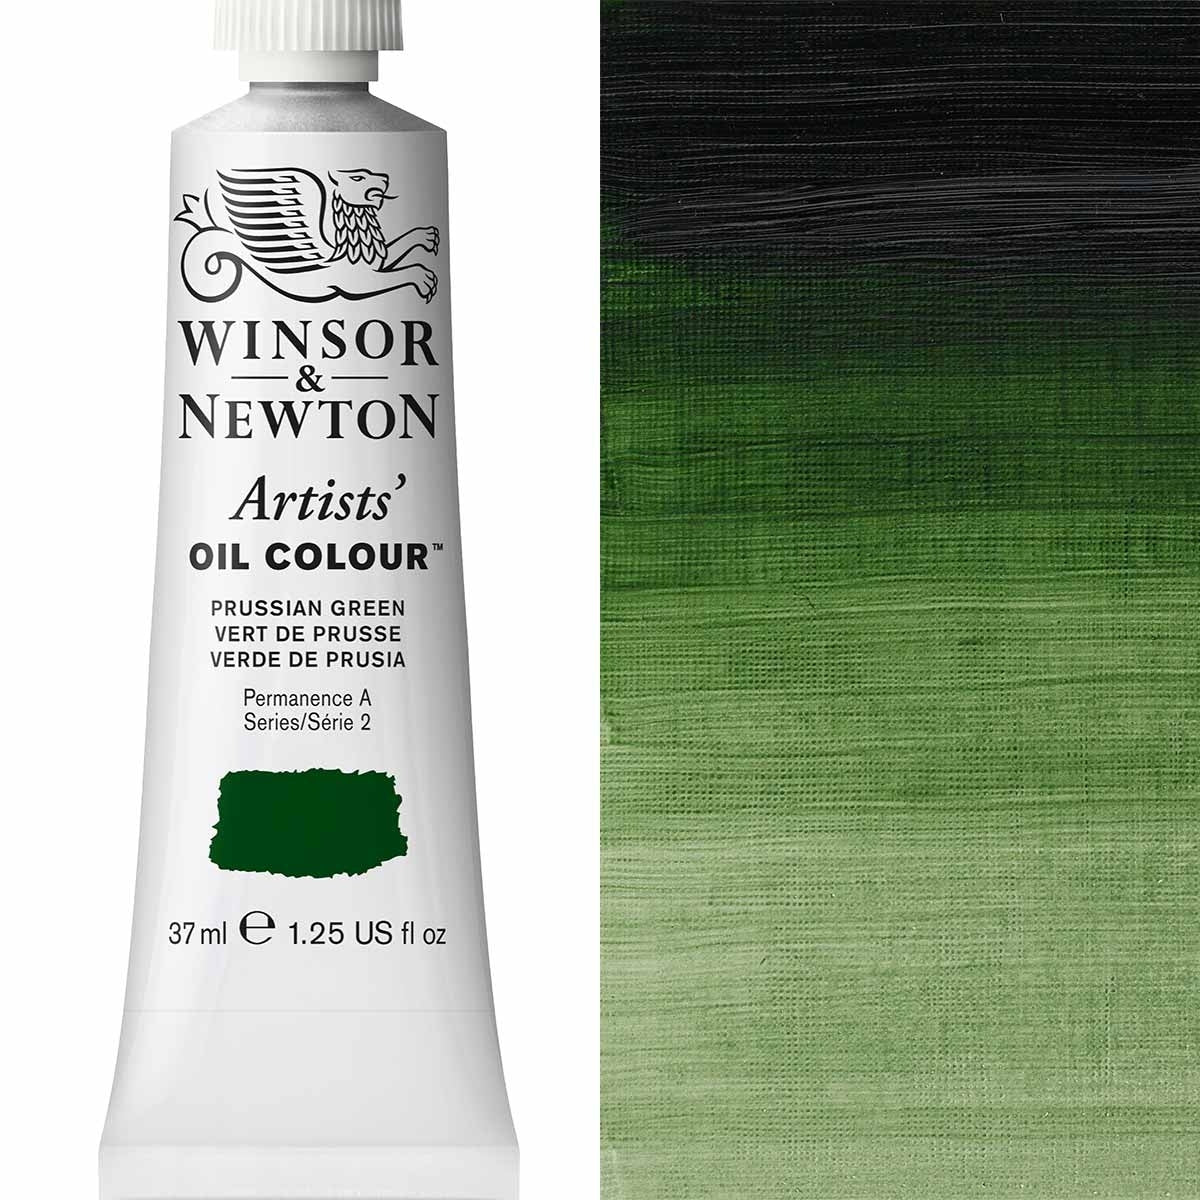 Winsor and Newton - Artists' Oil Colour - 37ml - Prussian Green